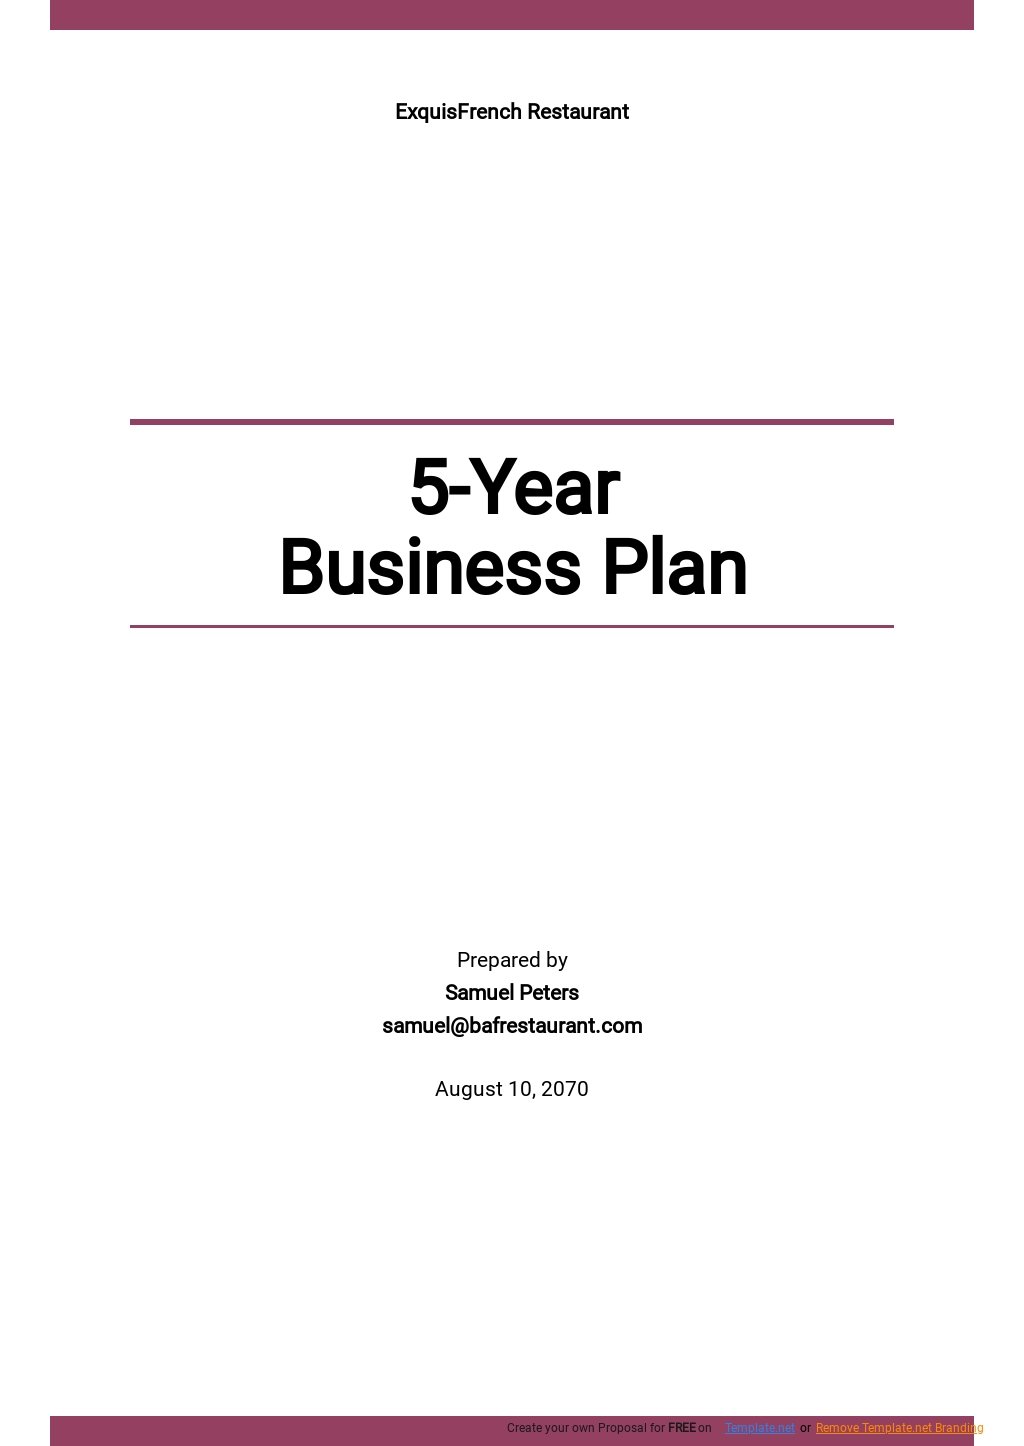 how to write a 5 year business plan